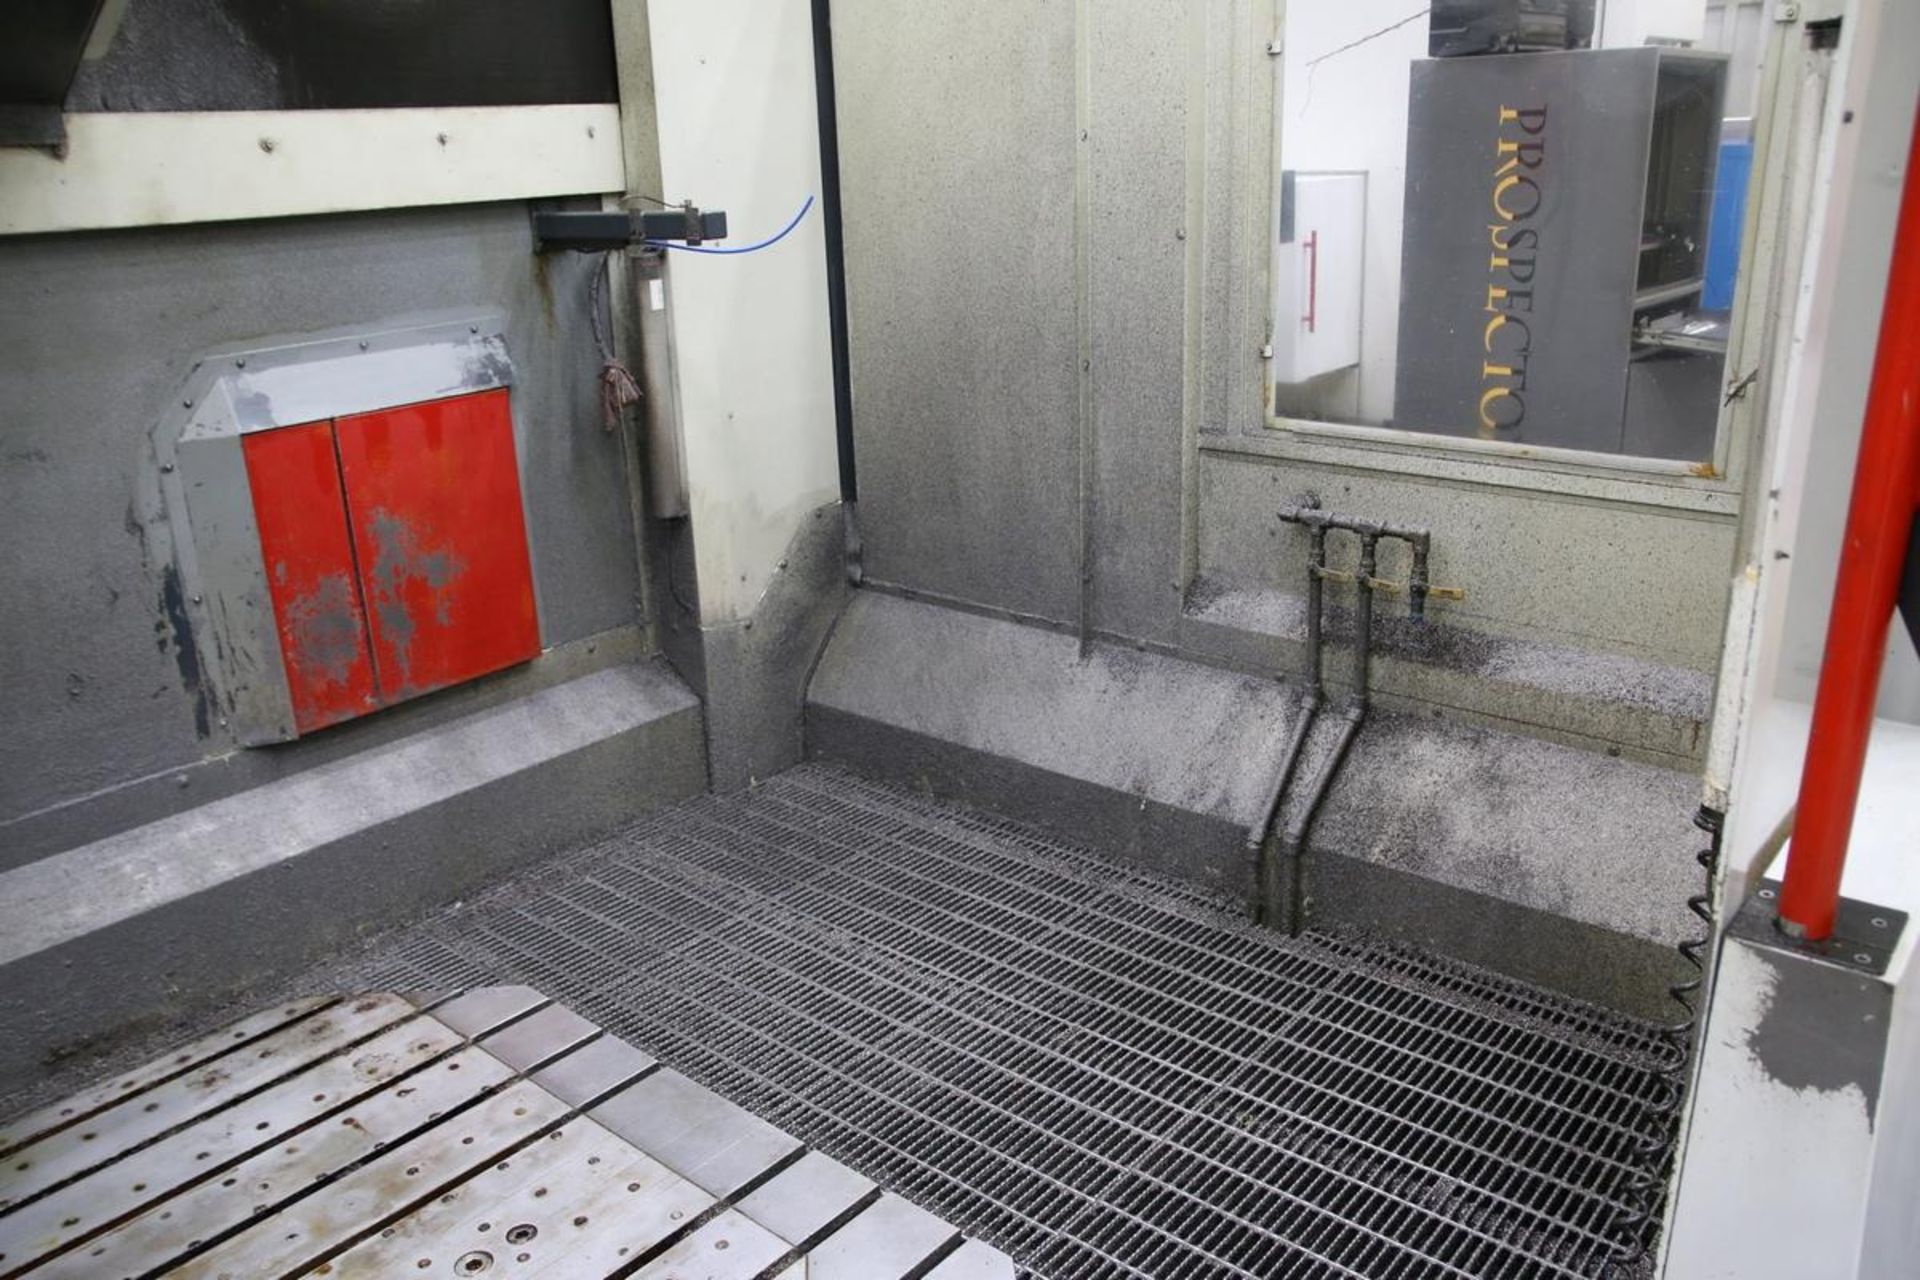 Fidia KR211 6-Axis High Speed CNC Vertical Machining Center - Image 8 of 27